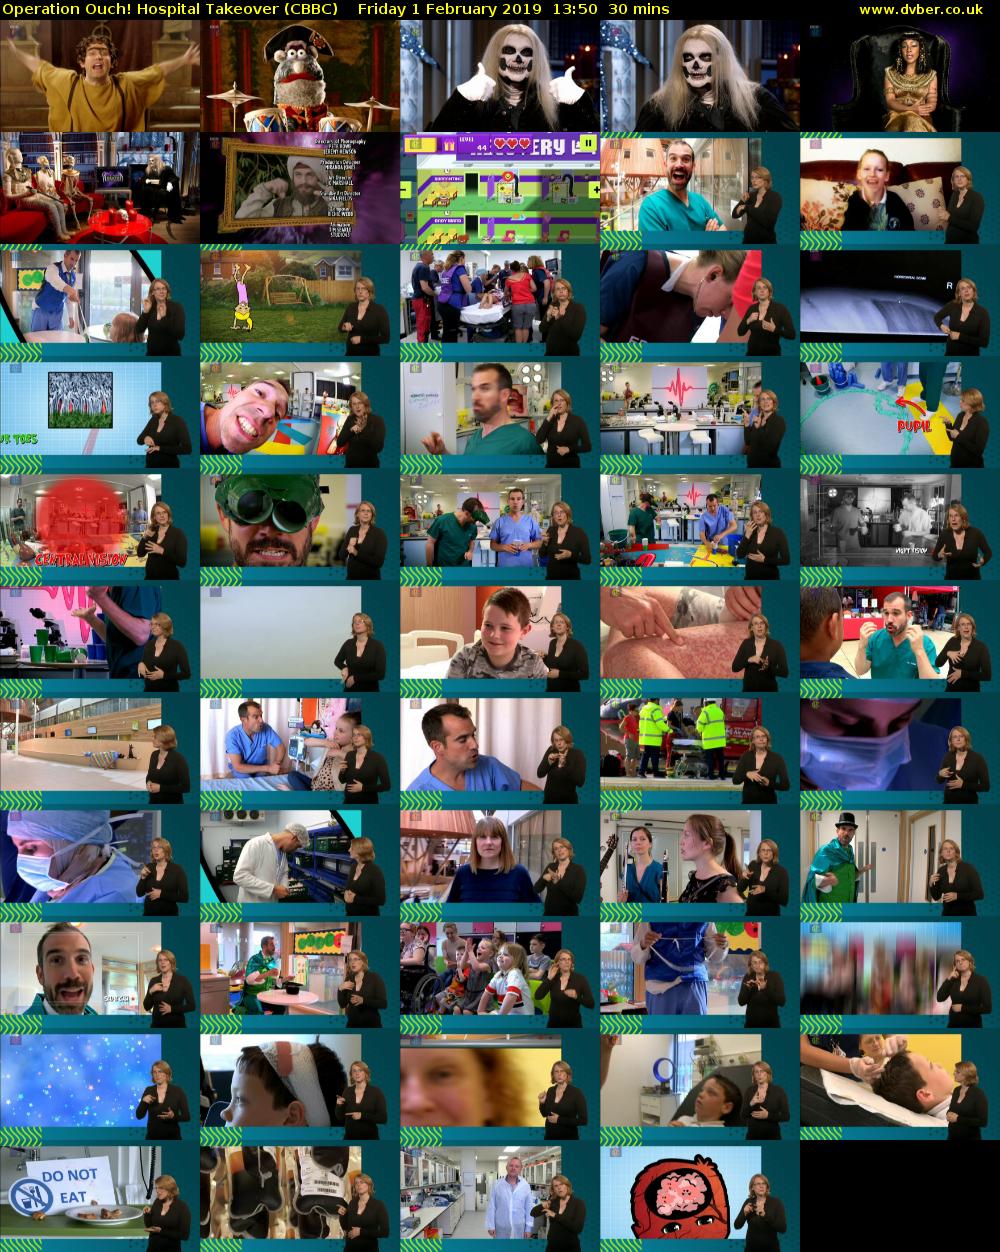 Operation Ouch! Hospital Takeover (CBBC) Friday 1 February 2019 13:50 - 14:20